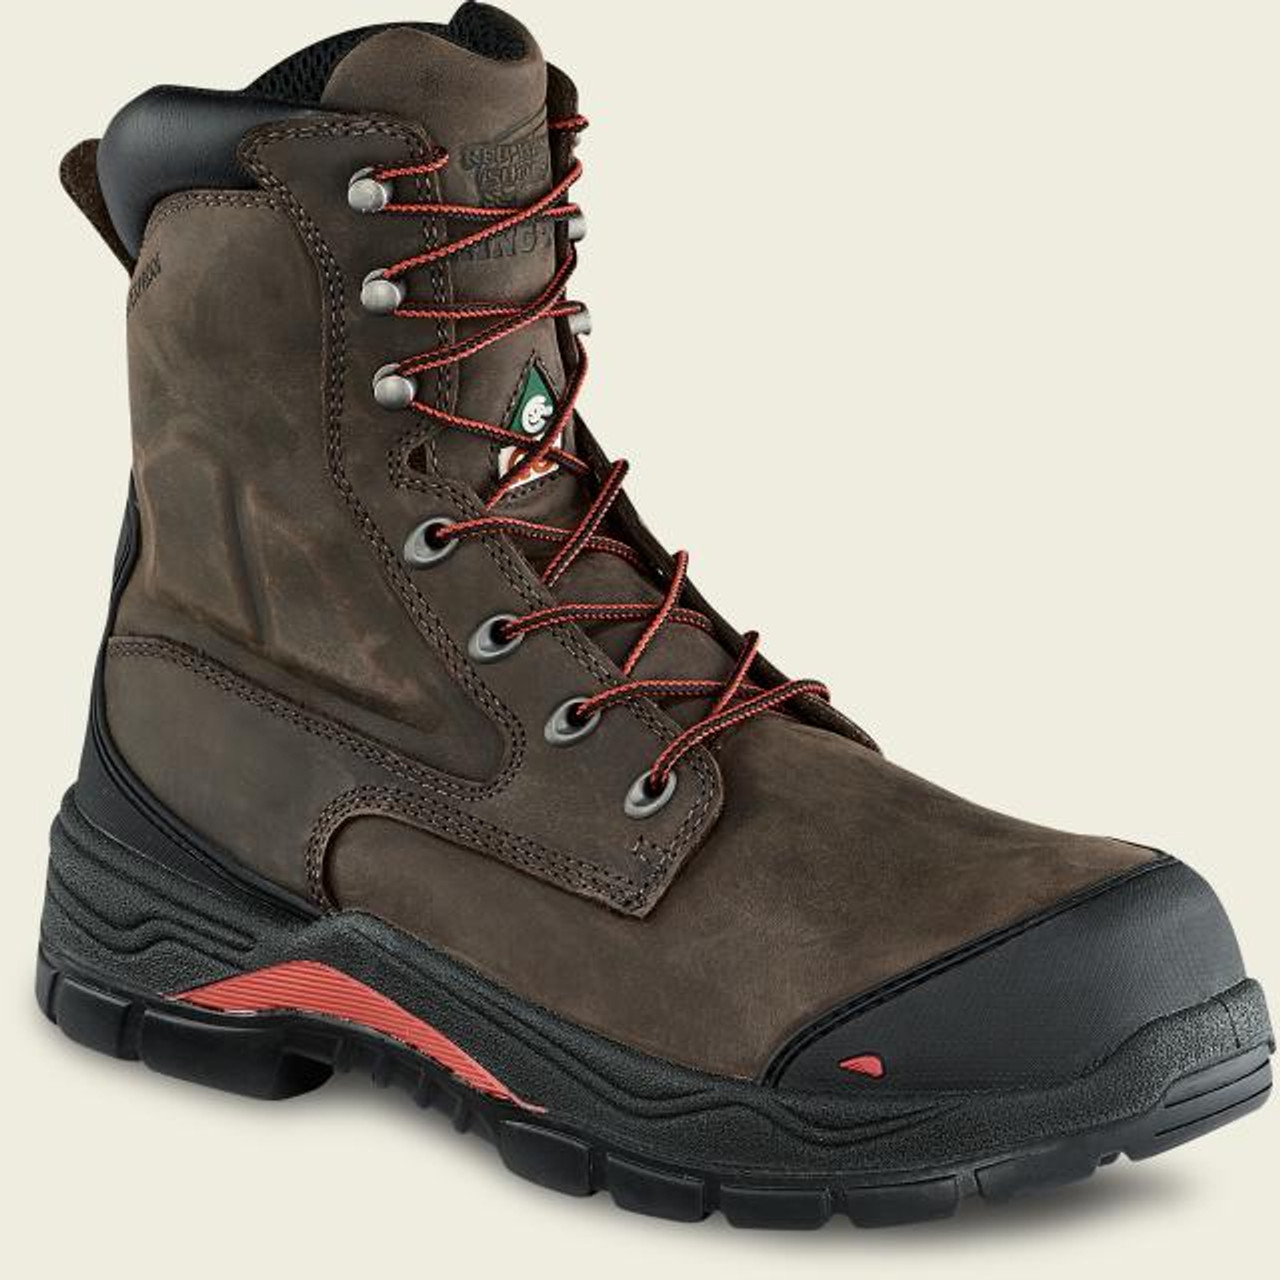 insulated safety boots